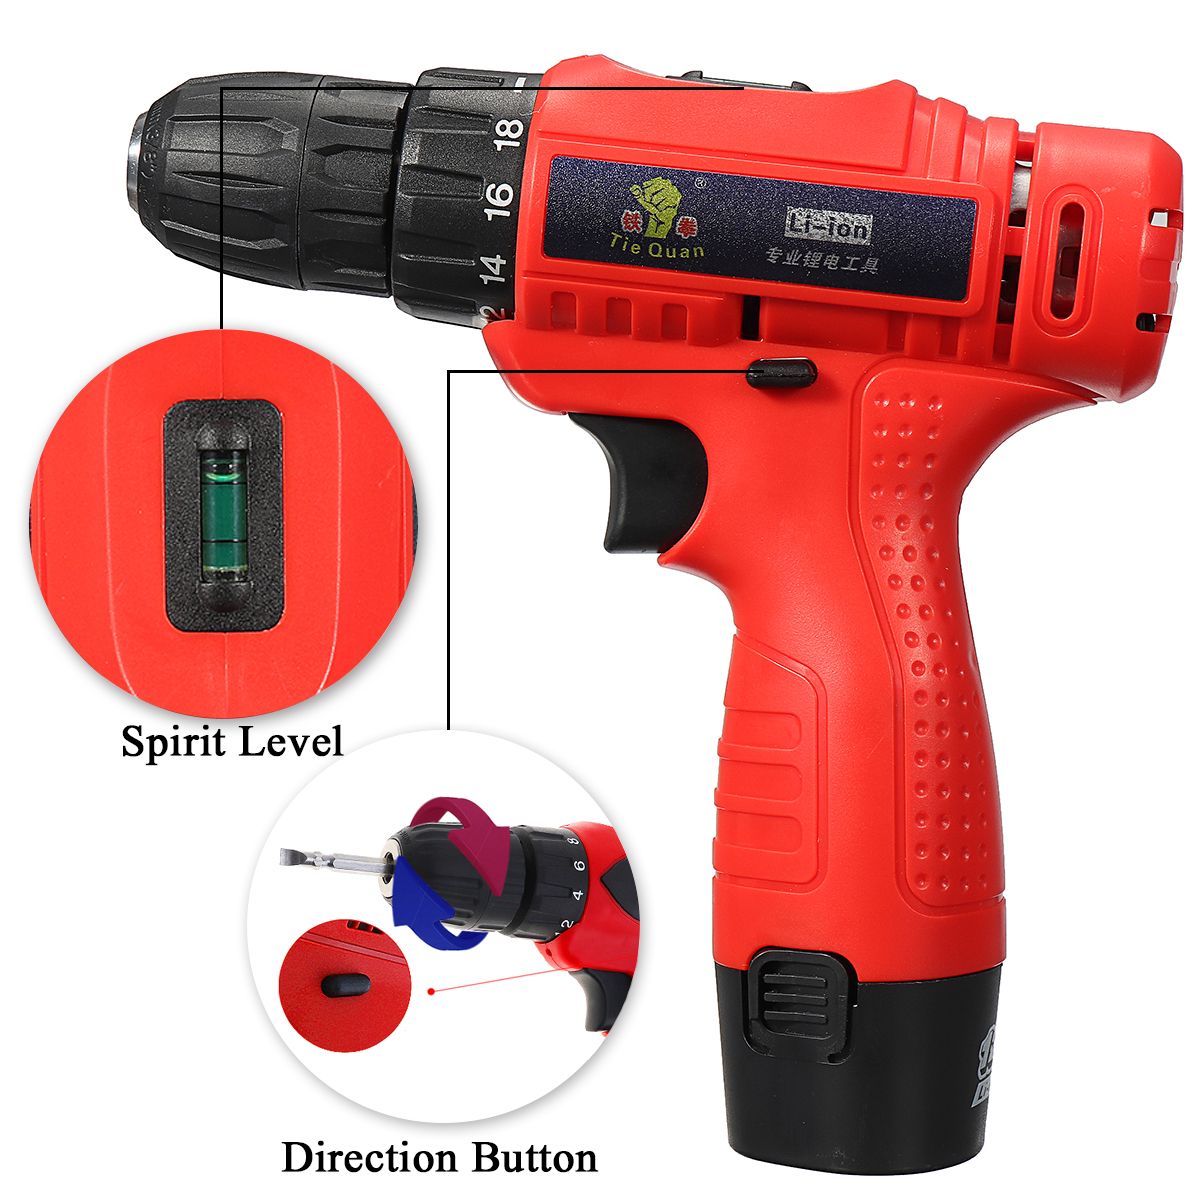 110V-240V-Cordless-Electric-Screwdriver-1-Battery-1-Charger-Drilling-Punching-Power-Tools-1287724